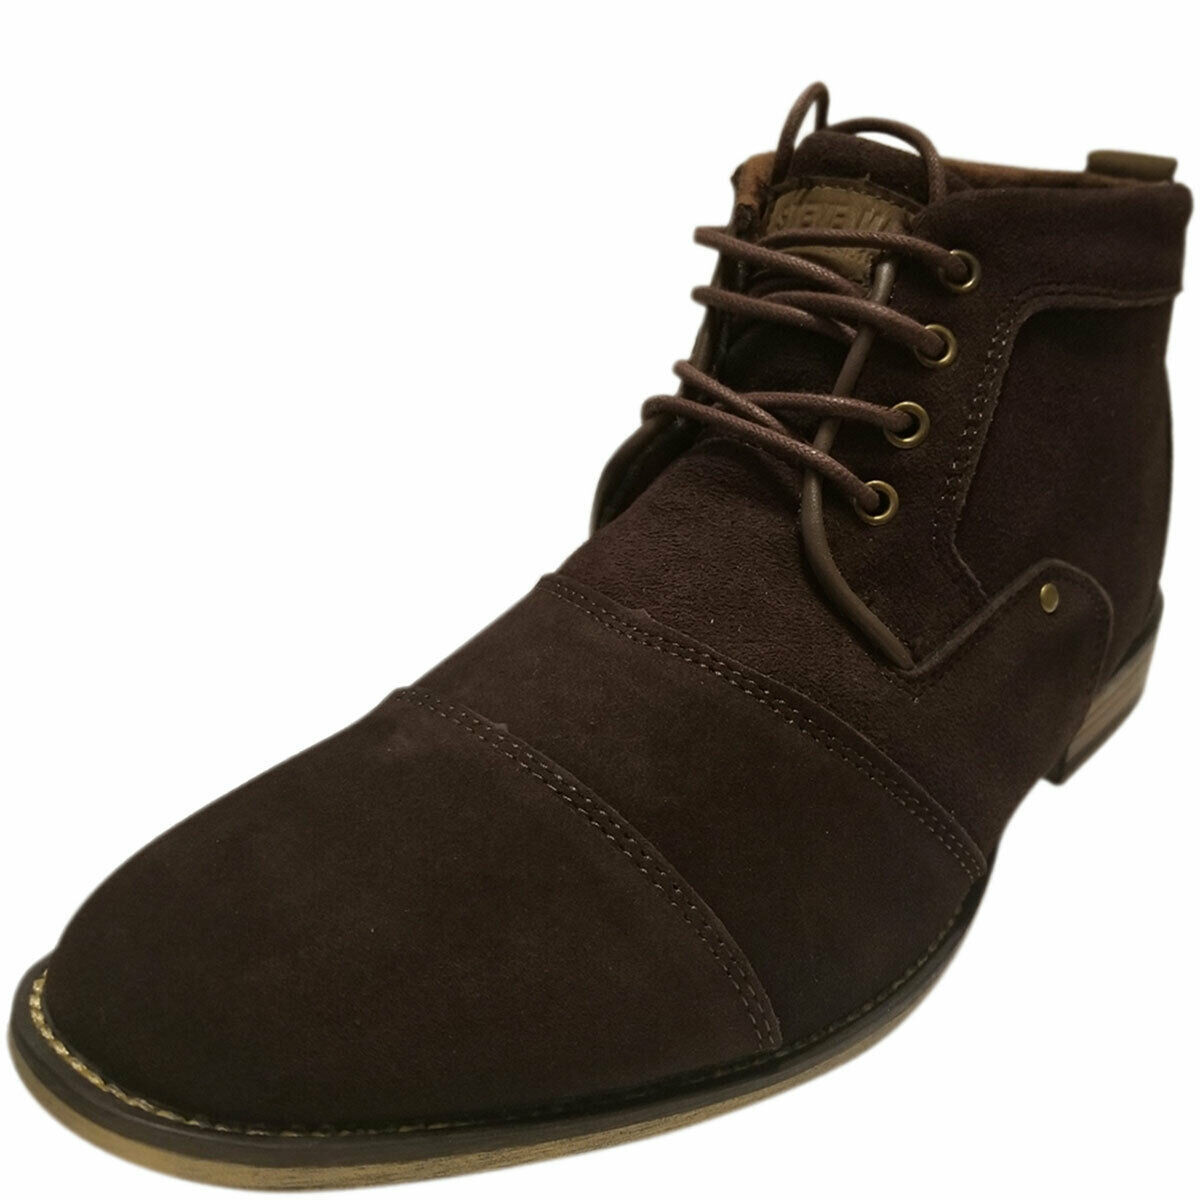 Steve Madden Men's Jonnie Cap toe Leather Boots Brown Suede 8 M MSRP 115 New - $68.60